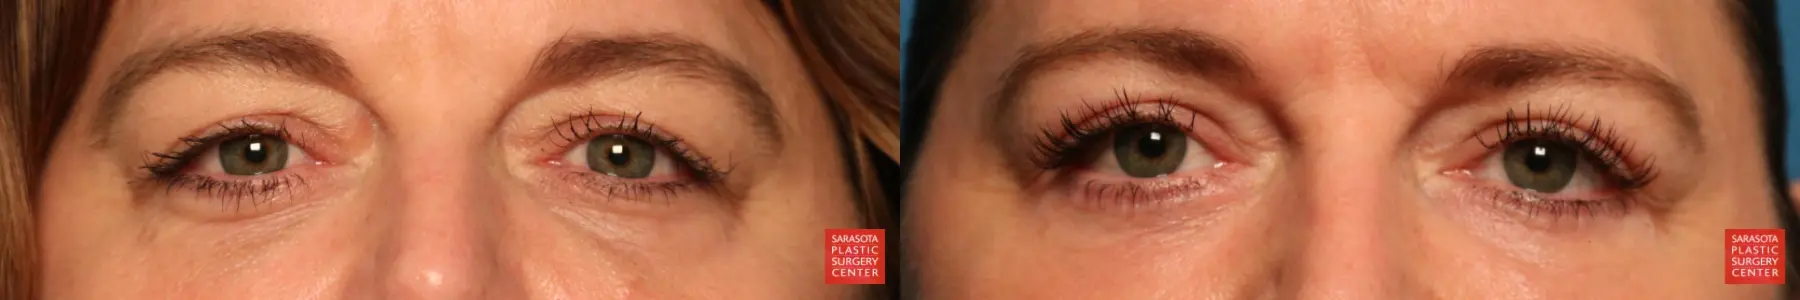 Eyelid Lift: Patient 5 - Before and After  